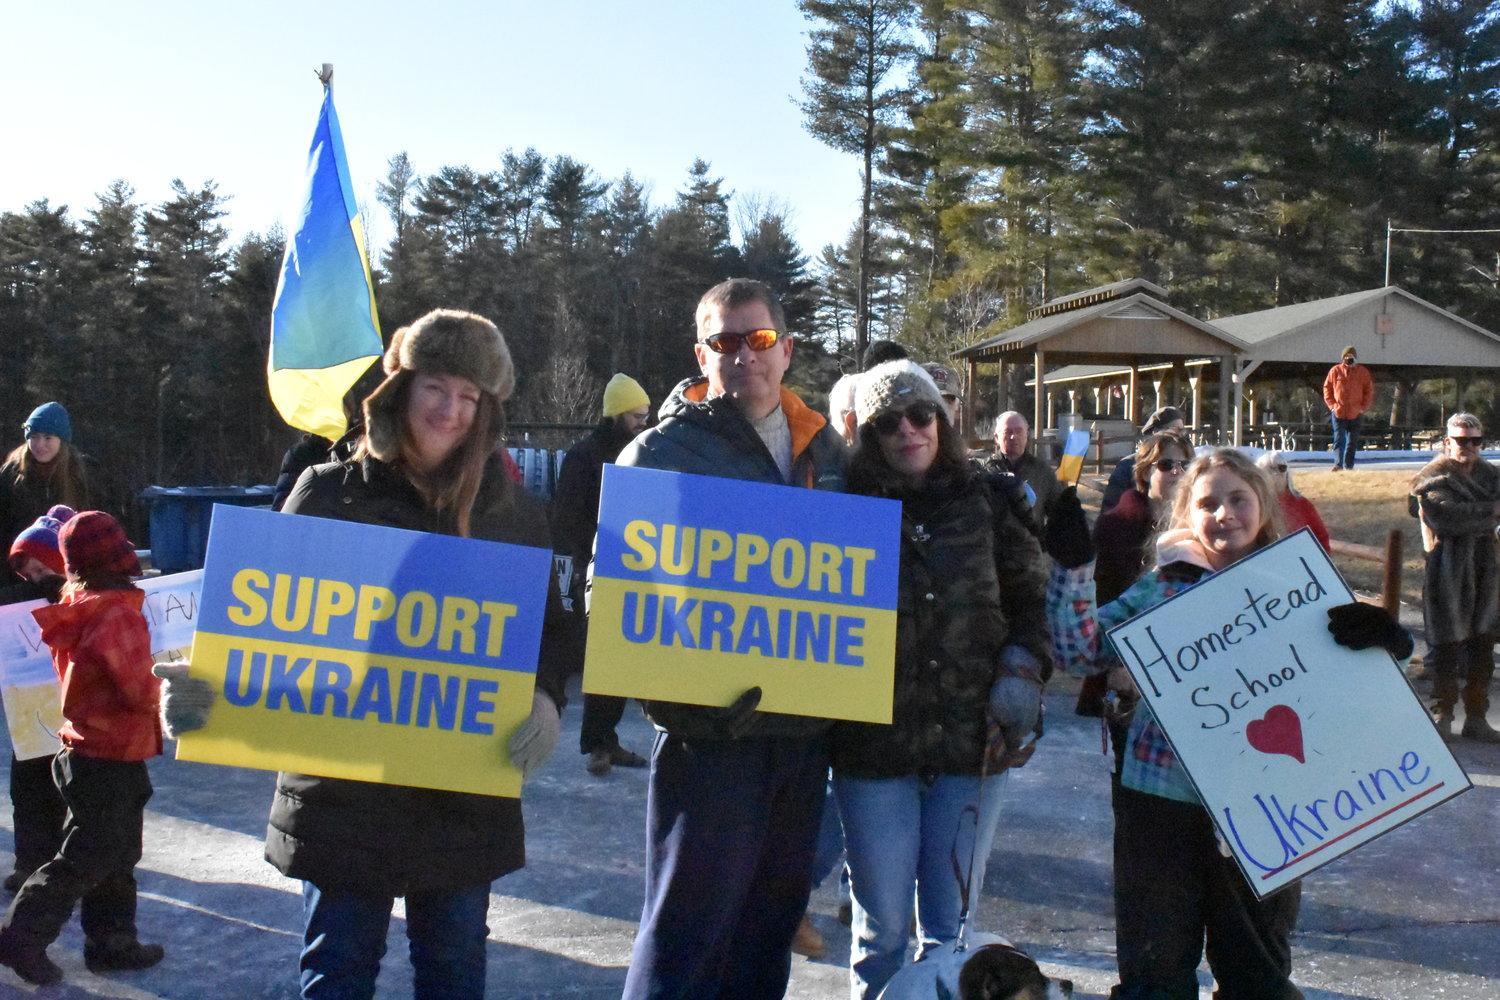 Students from the Homestead School and their families were in attendance at a rally in support of Ukraine.